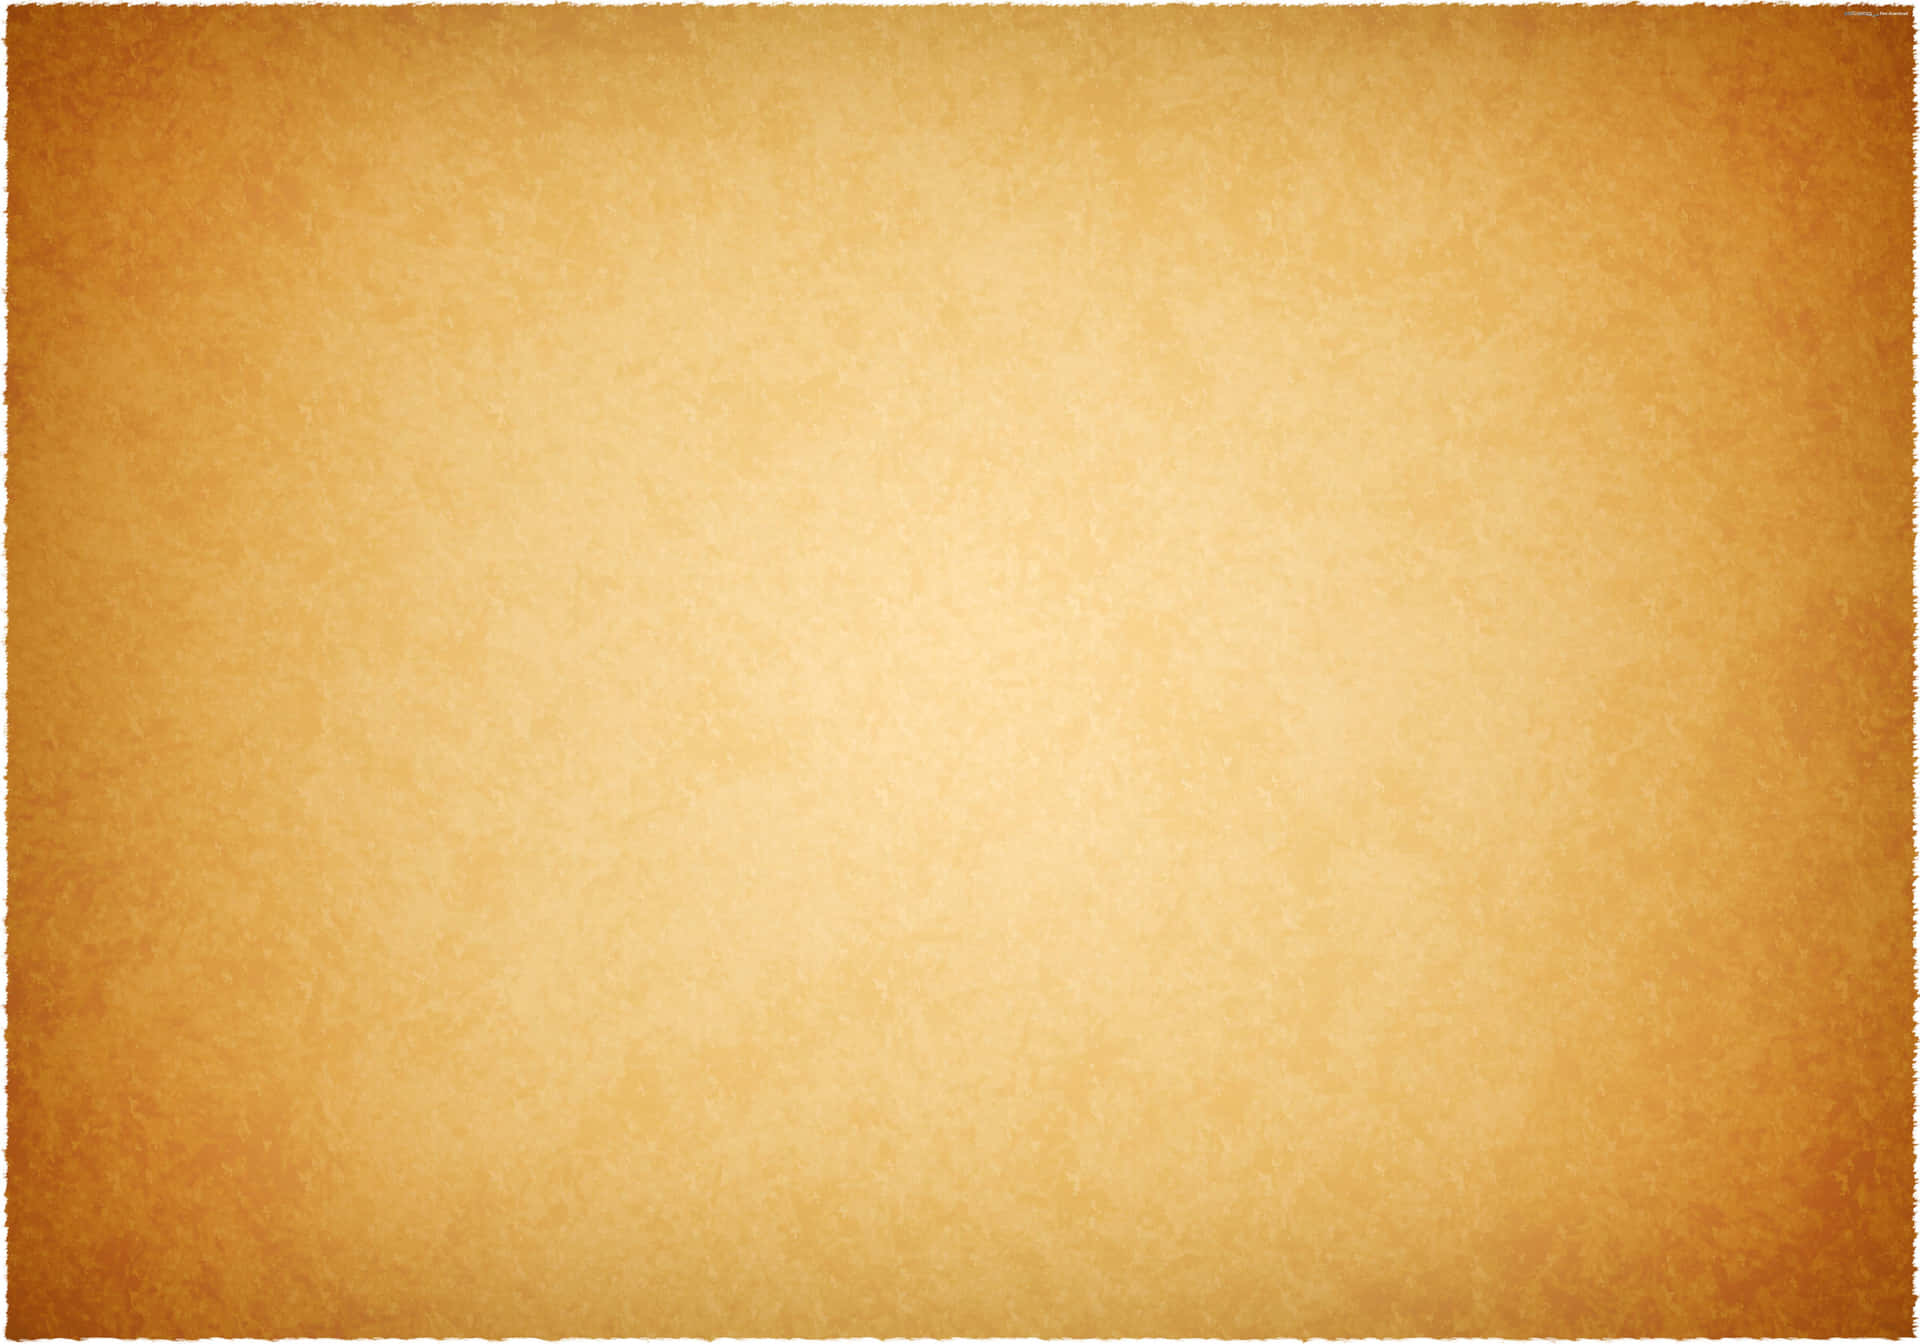 A Yellow Paper Background With A Square Shape